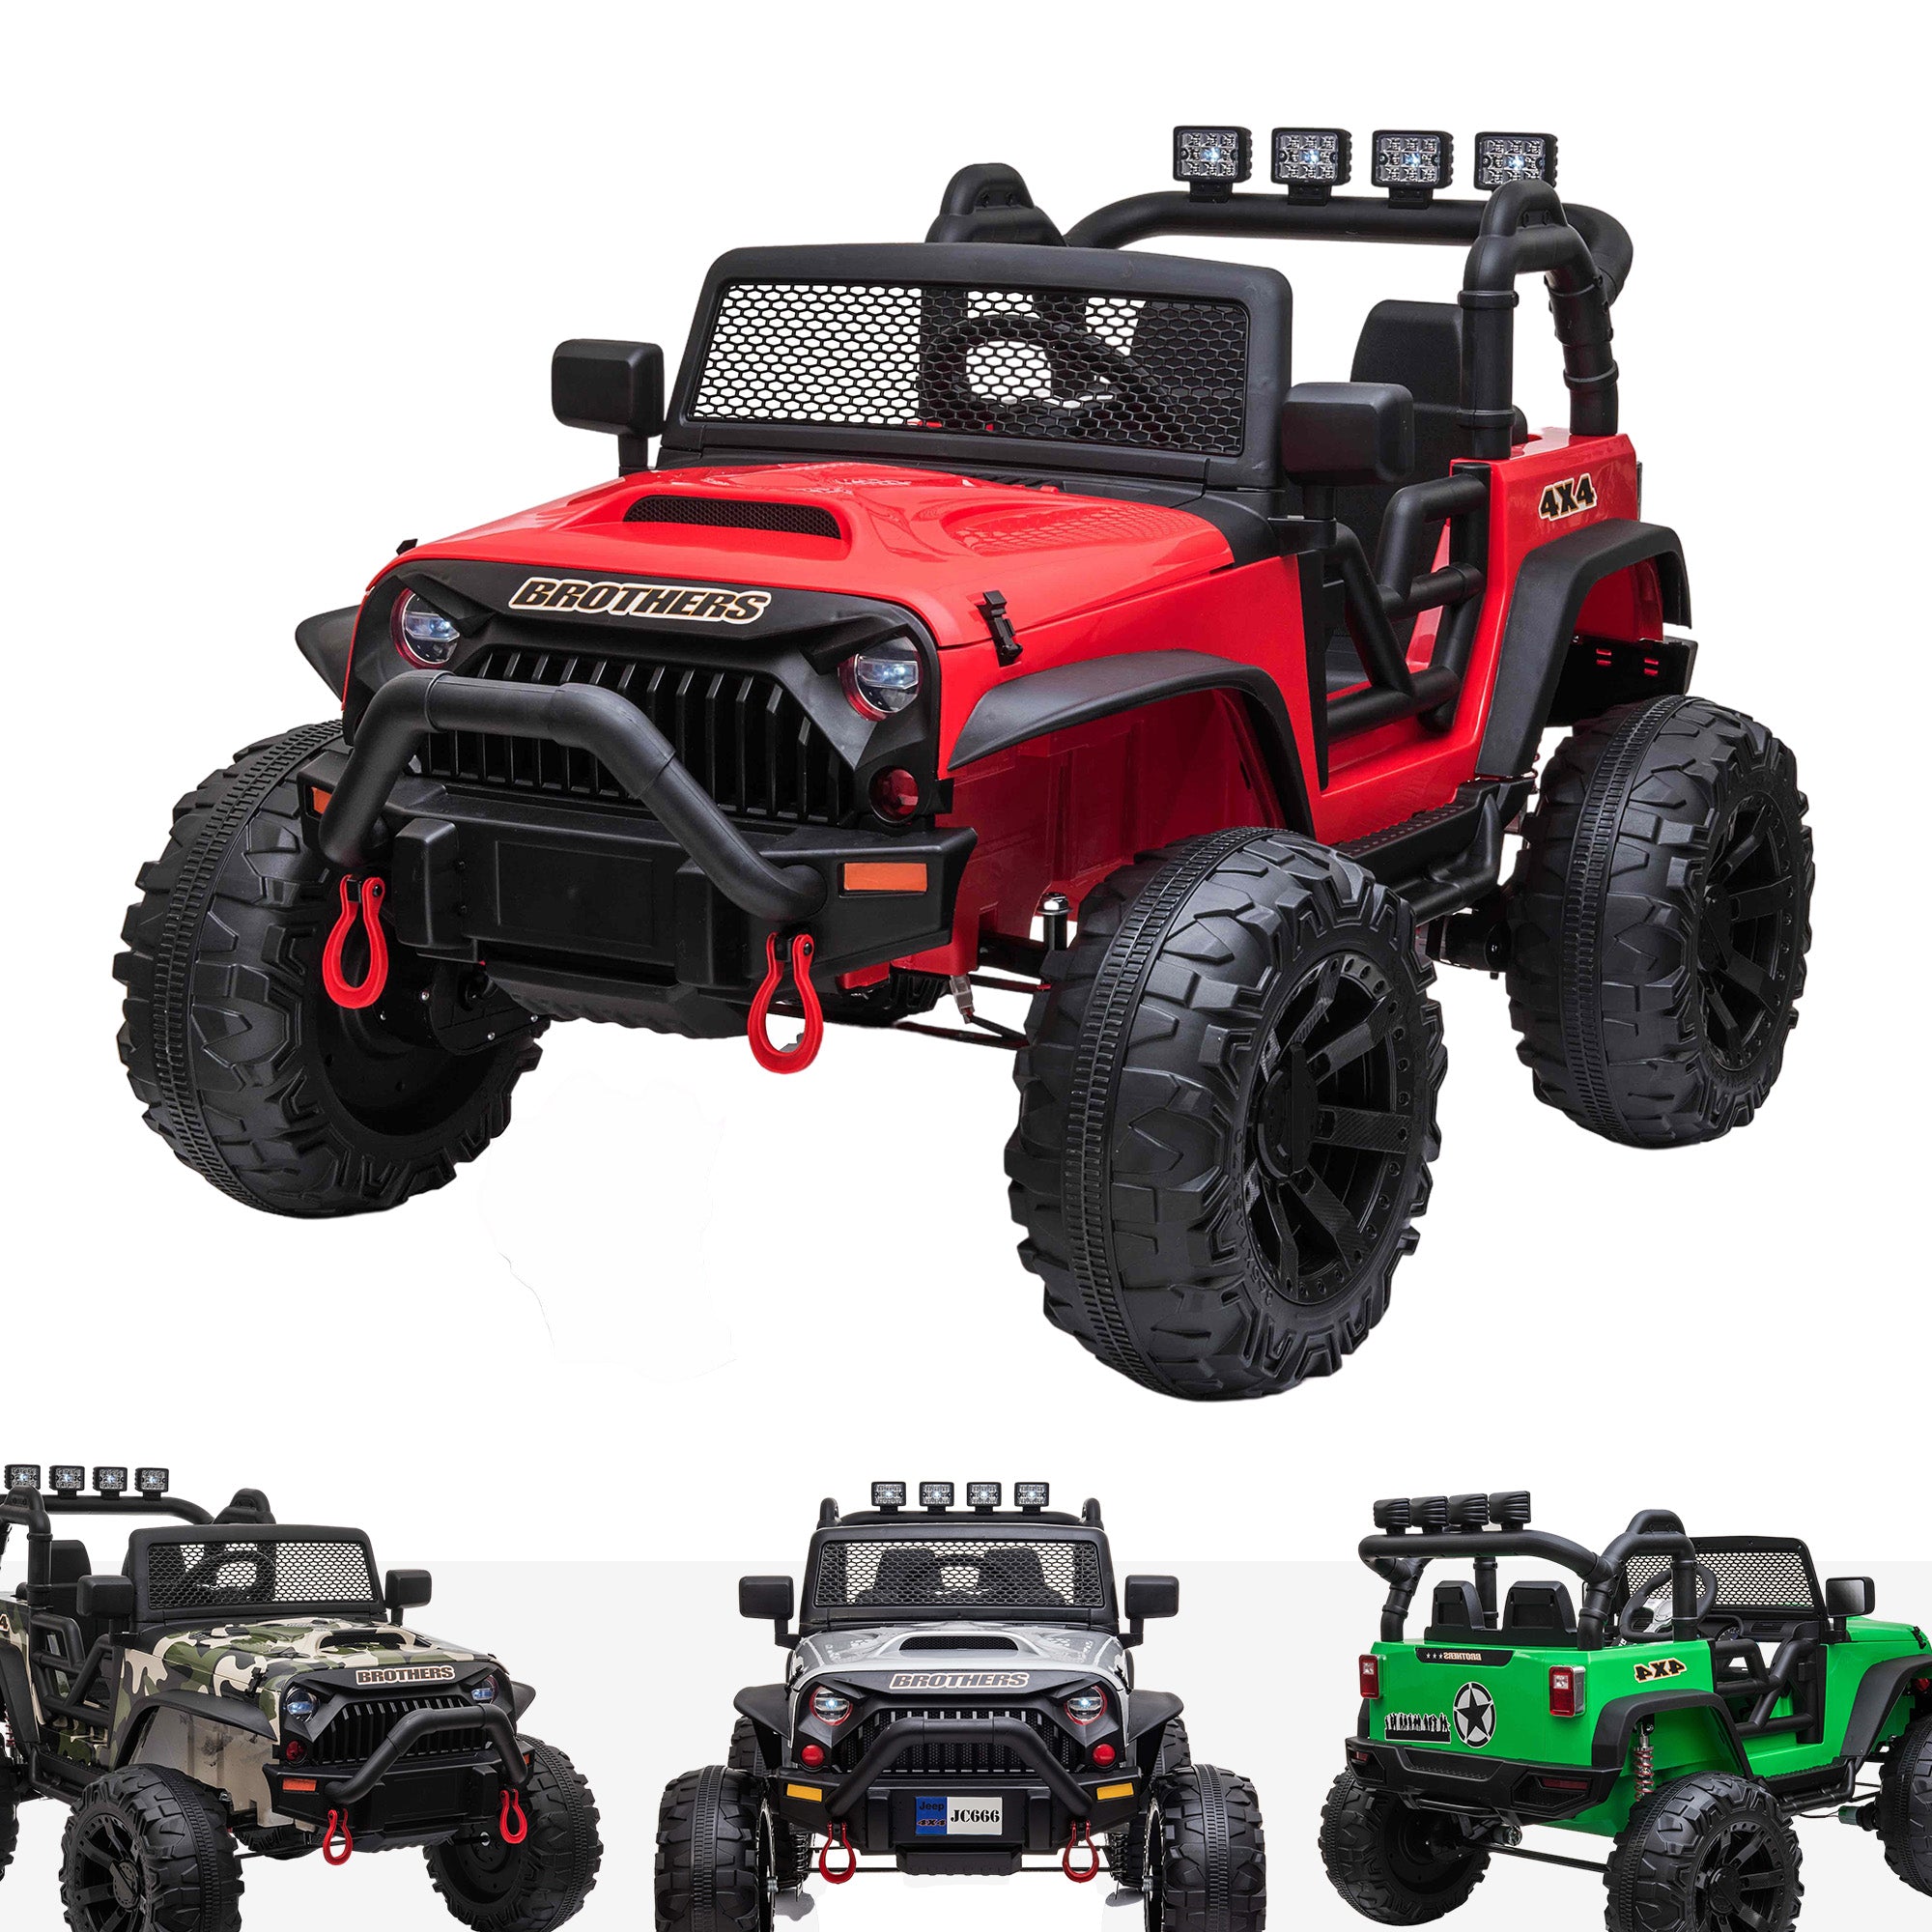 kids-24v-jeep-wrangler-style-off-road-electric-ride-on-car-Red.jpg